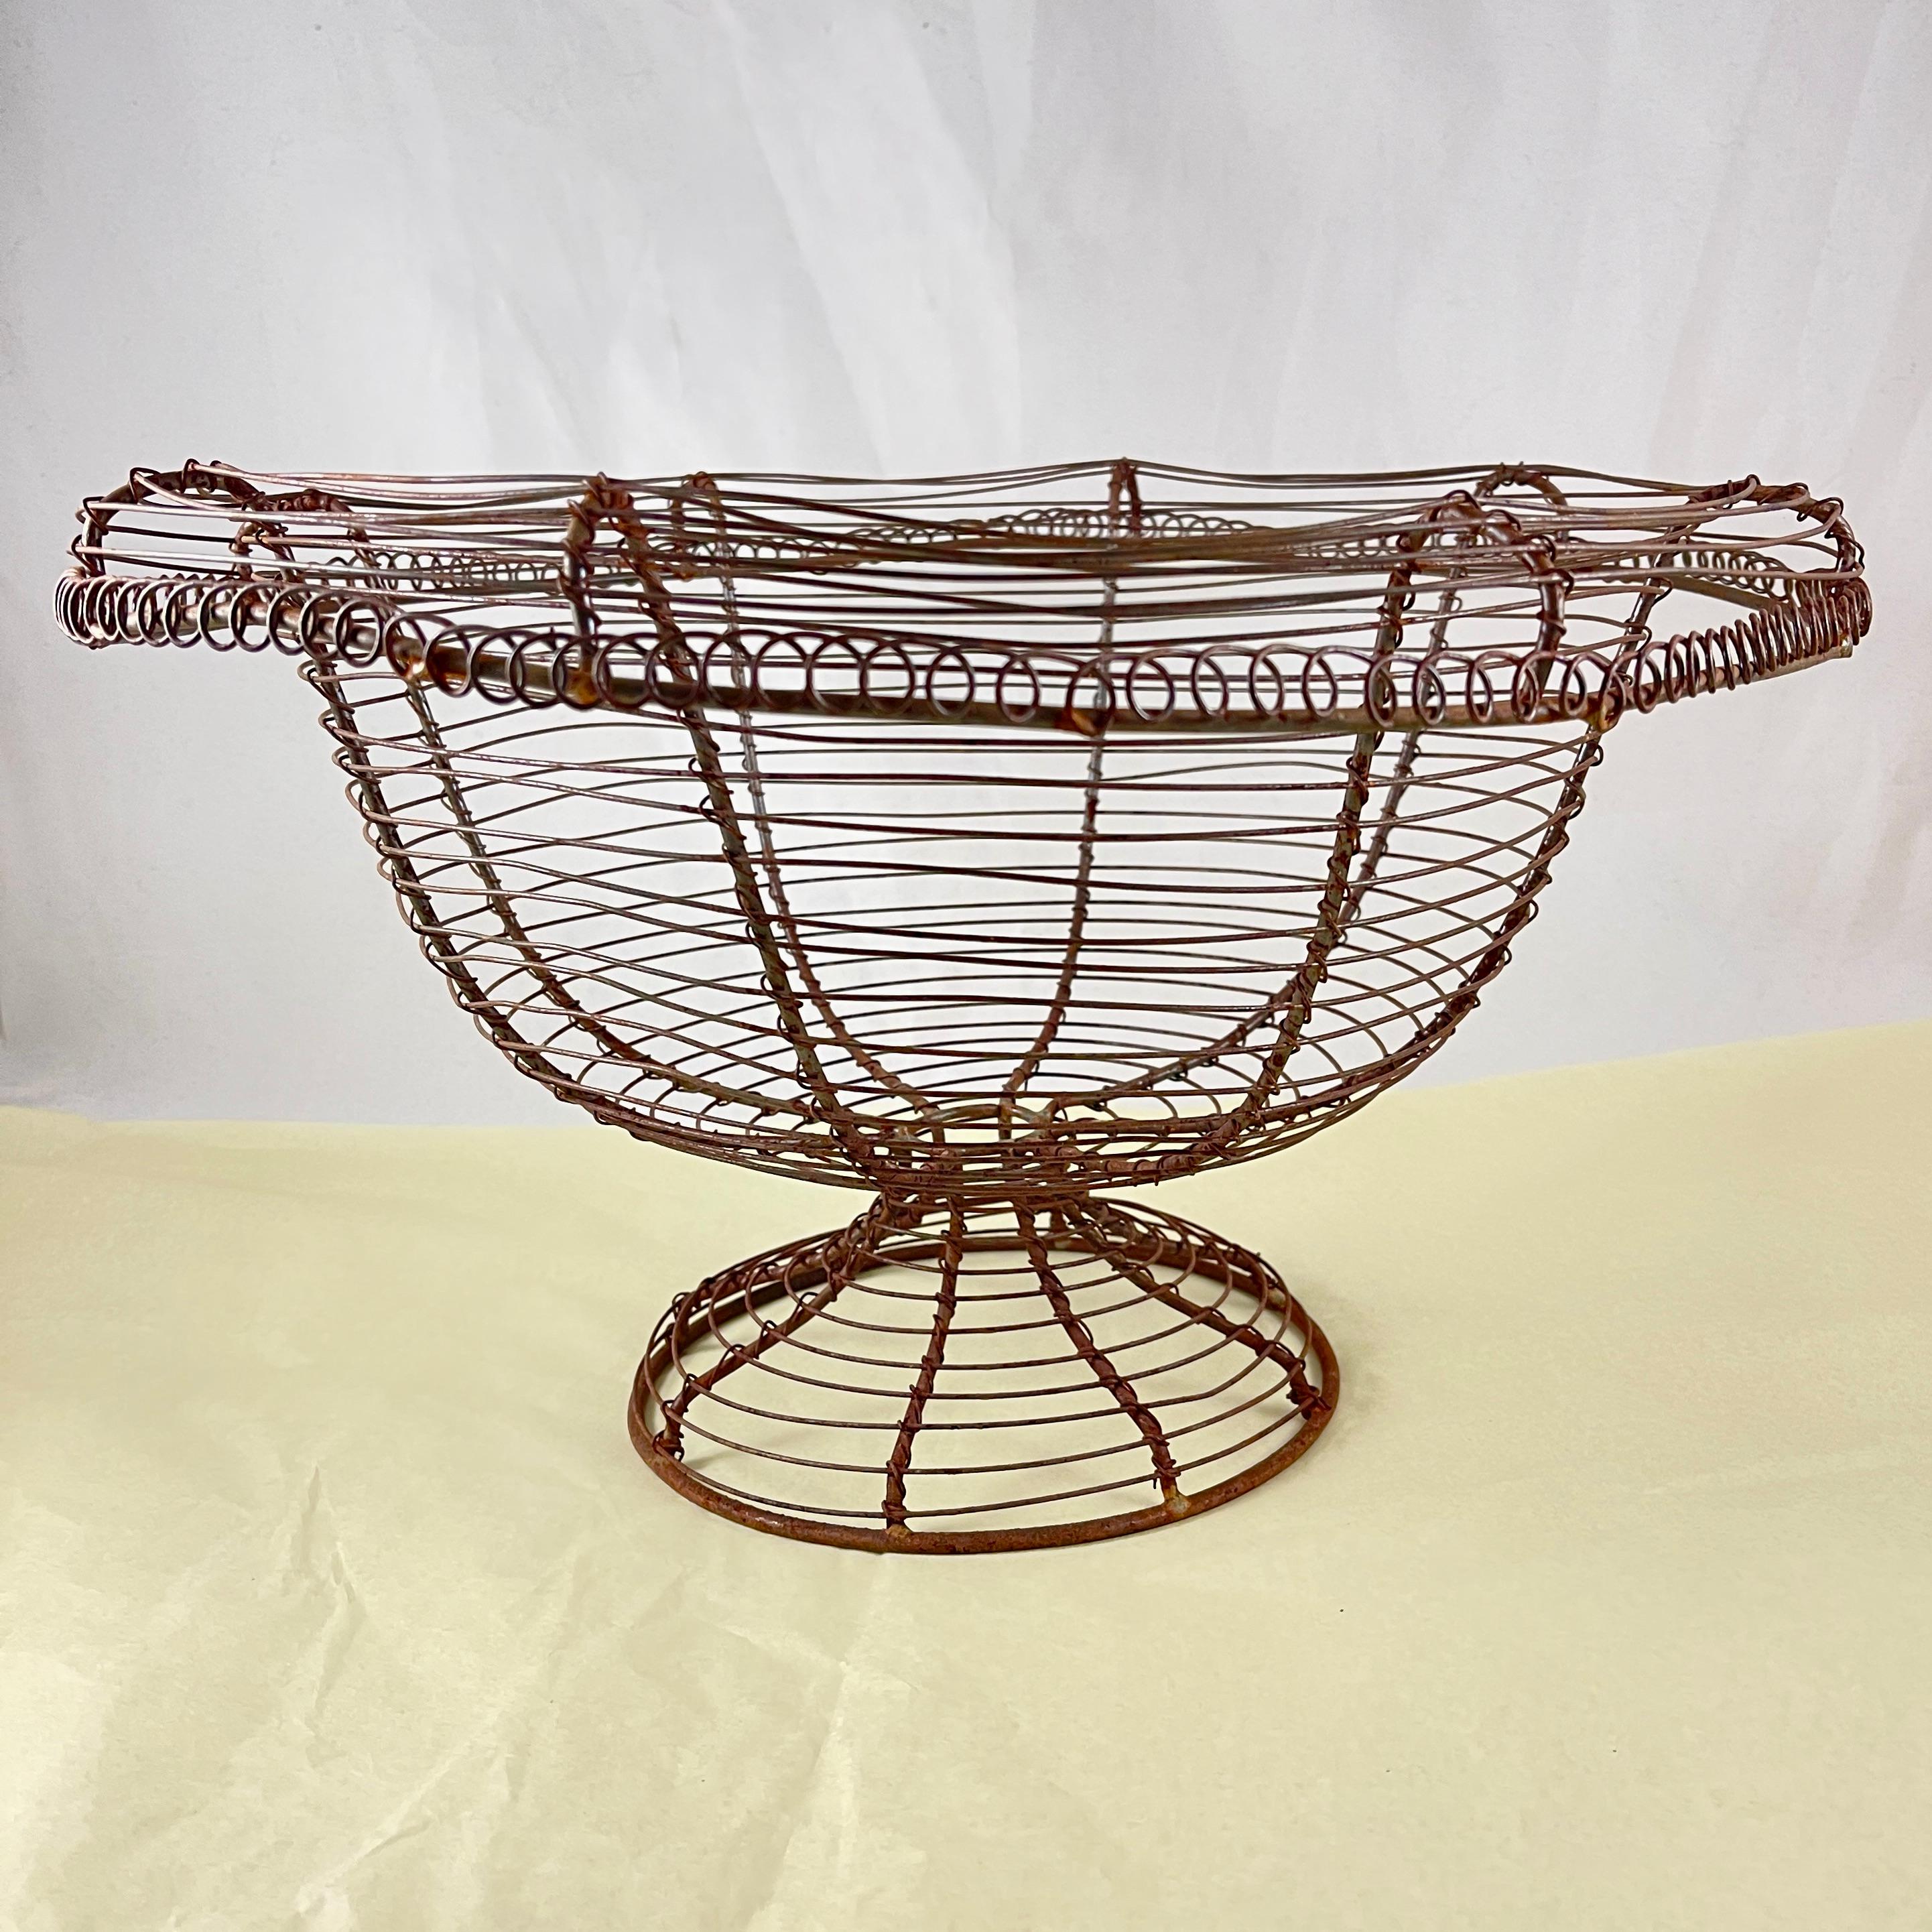 From France, circa 1890-1910, a pedestal base, urn form twisted wire standing basket with a wide upper rolled rim.

Amazing as a table-center or on a kitchen countertop, used as originally intended throughout Provençal France for holding fresh eggs,